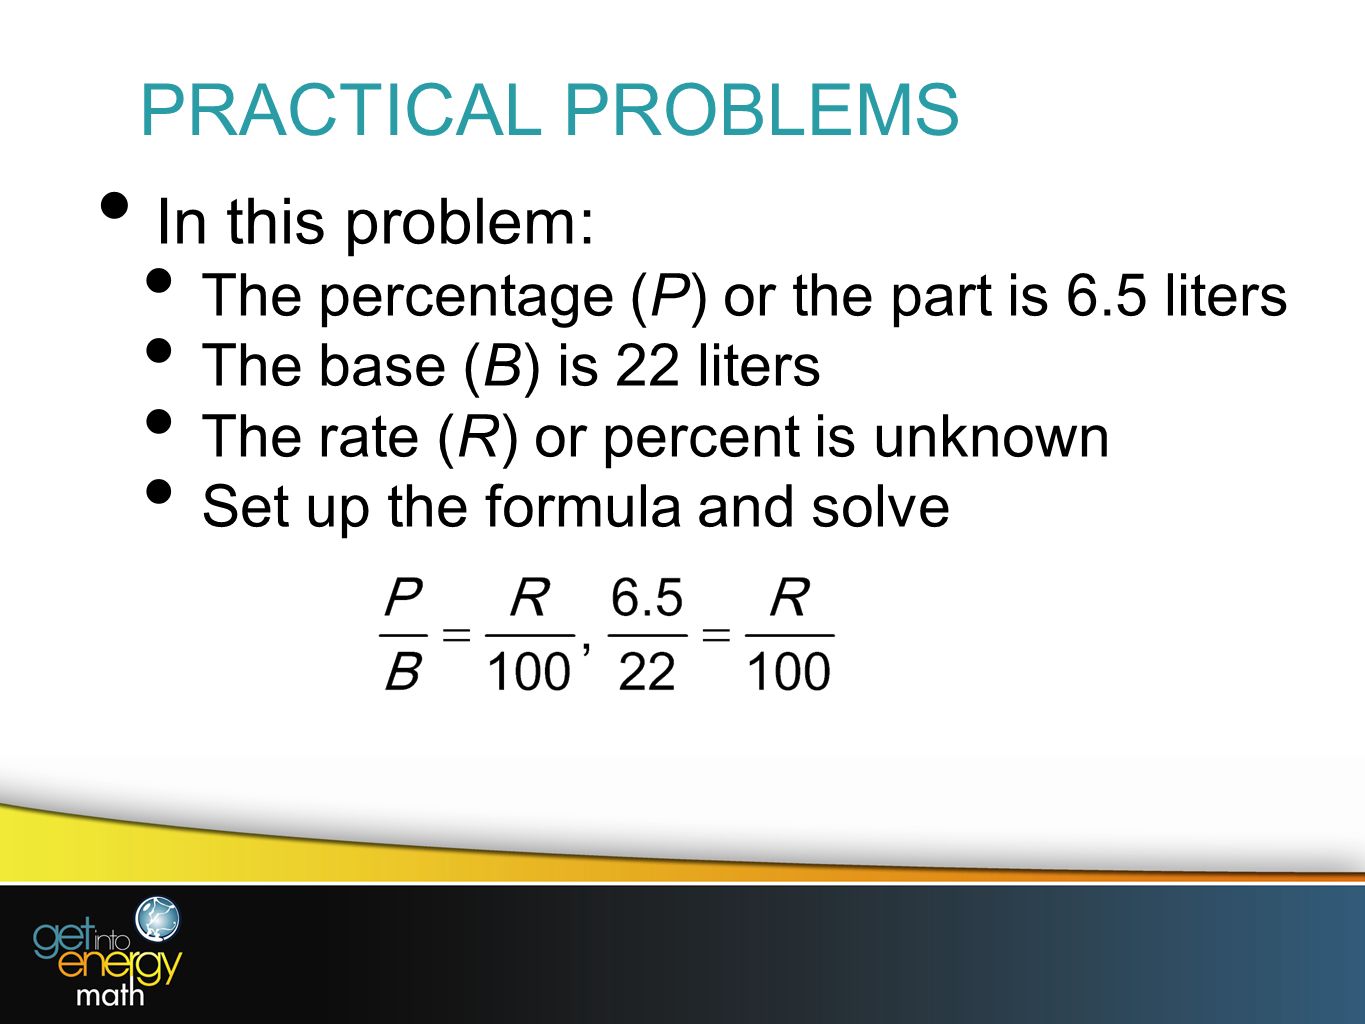 PRACTICAL PROBLEMS In this problem: The percentage (P) or the part is 6.5 liters The base (B) is 22 liters The rate (R) or percent is unknown Set up the formula and solve